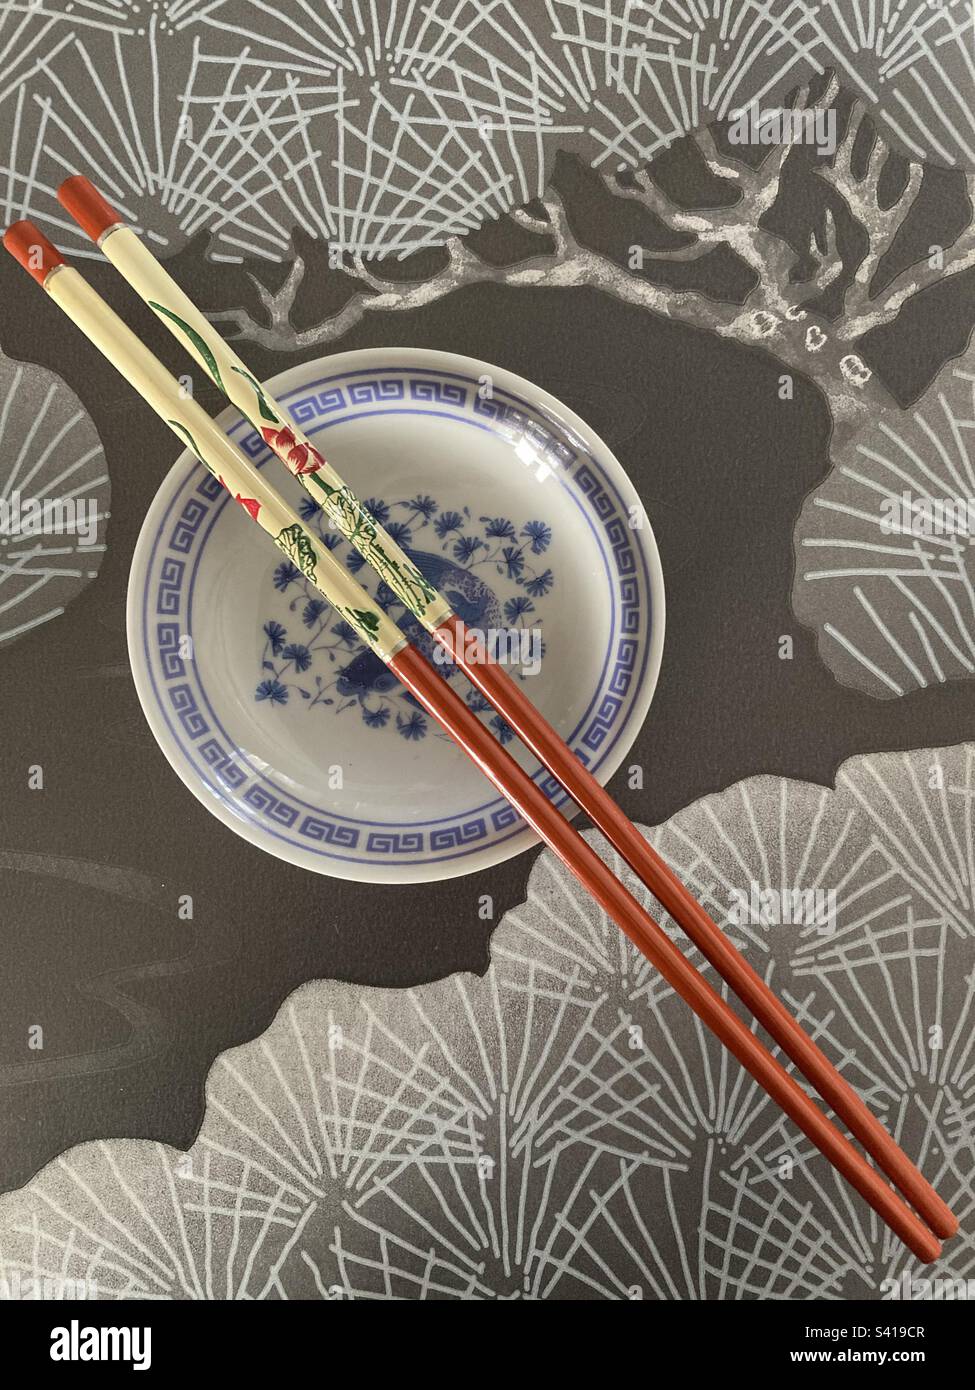 A pair of chopsticks on a Chinese dish Stock Photo